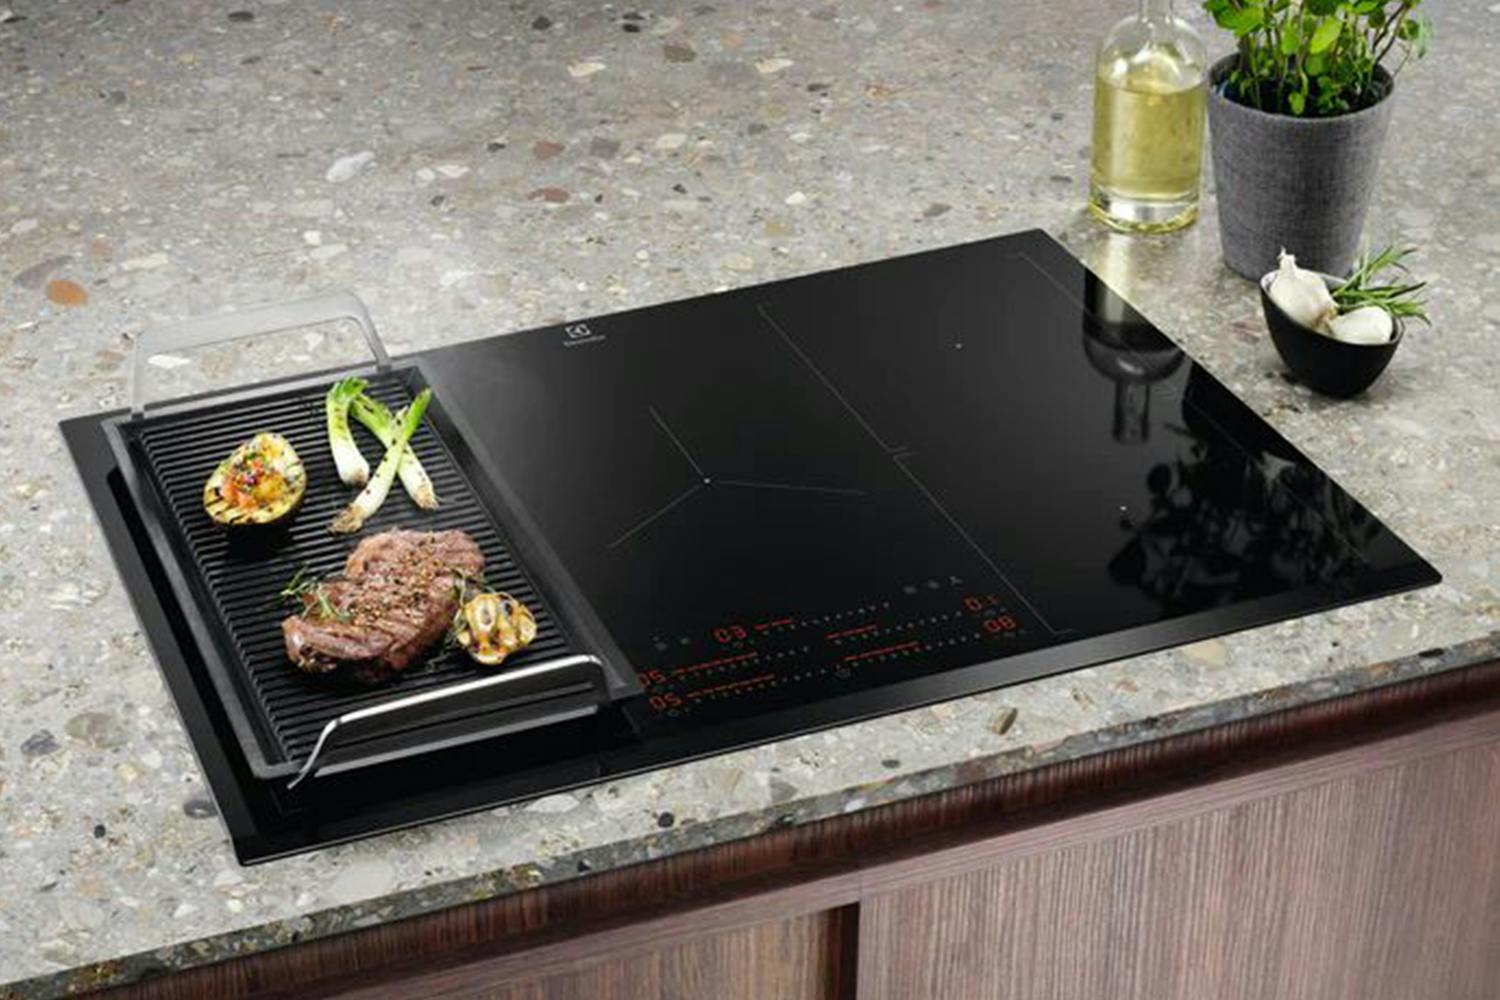 Electrolux 600 Series 80cm Built-in Induction Hob | EIV84550